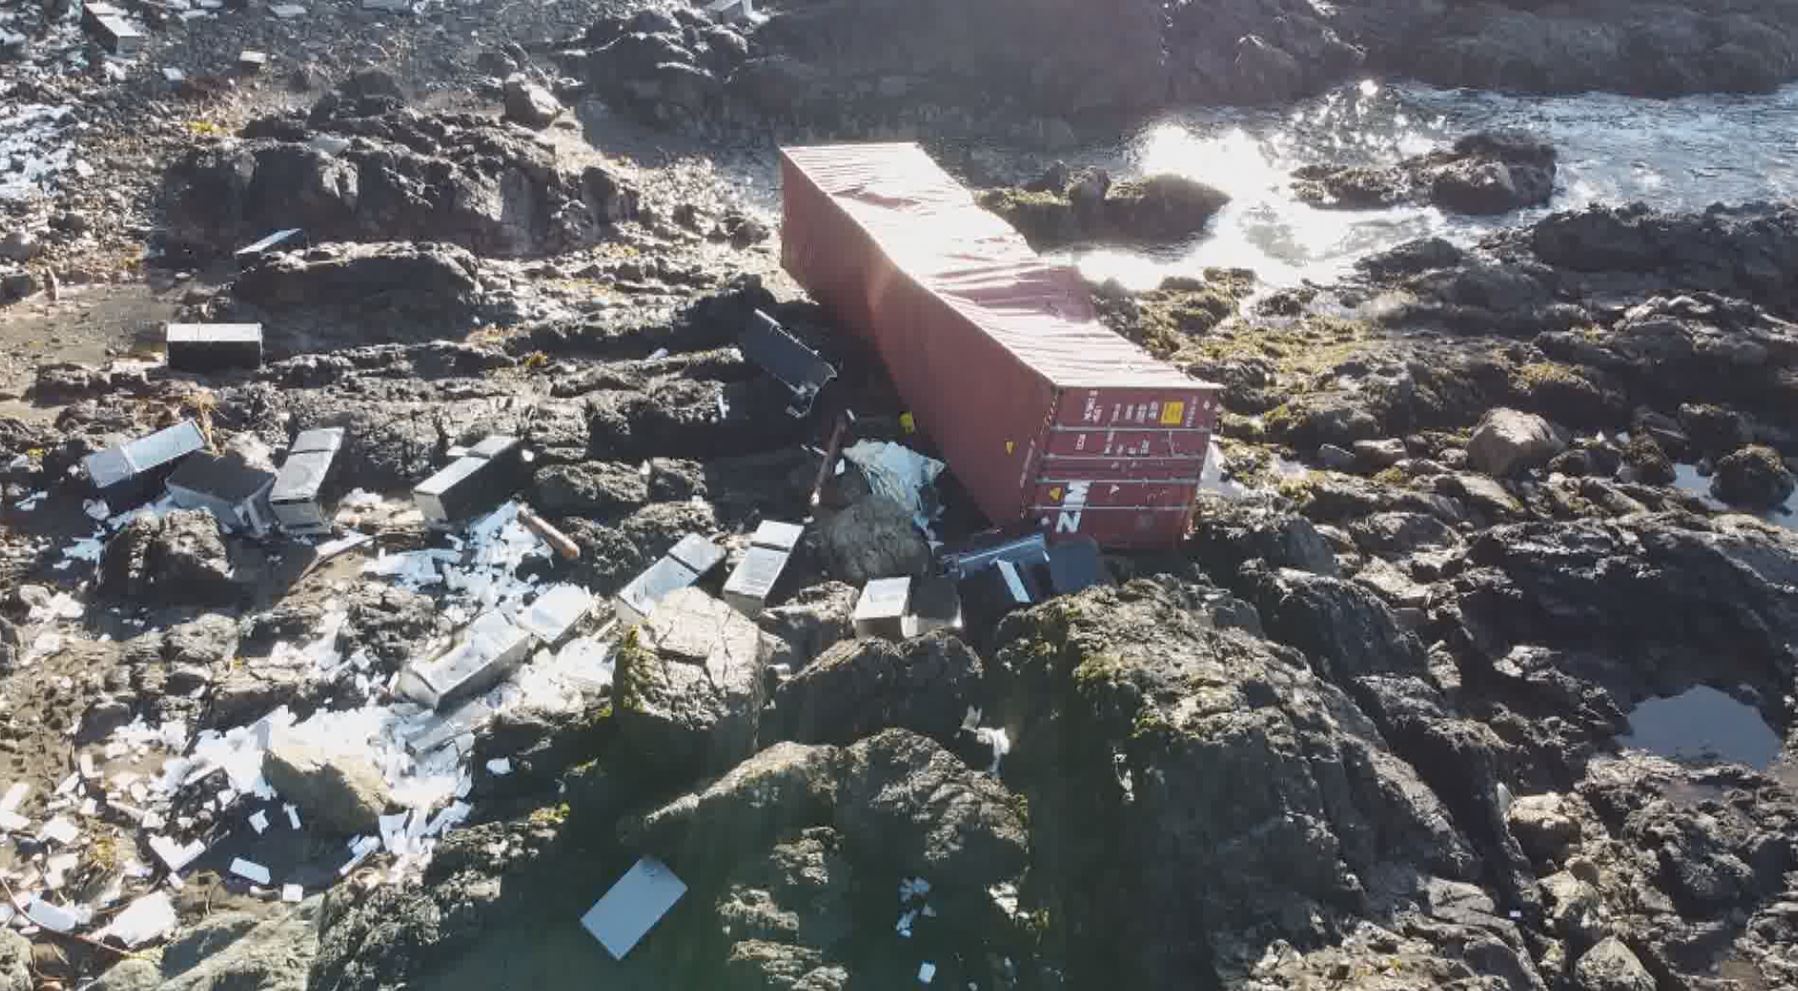 More than 20 coolers wash up in Alaska from MV Zim Kingston cargo spill